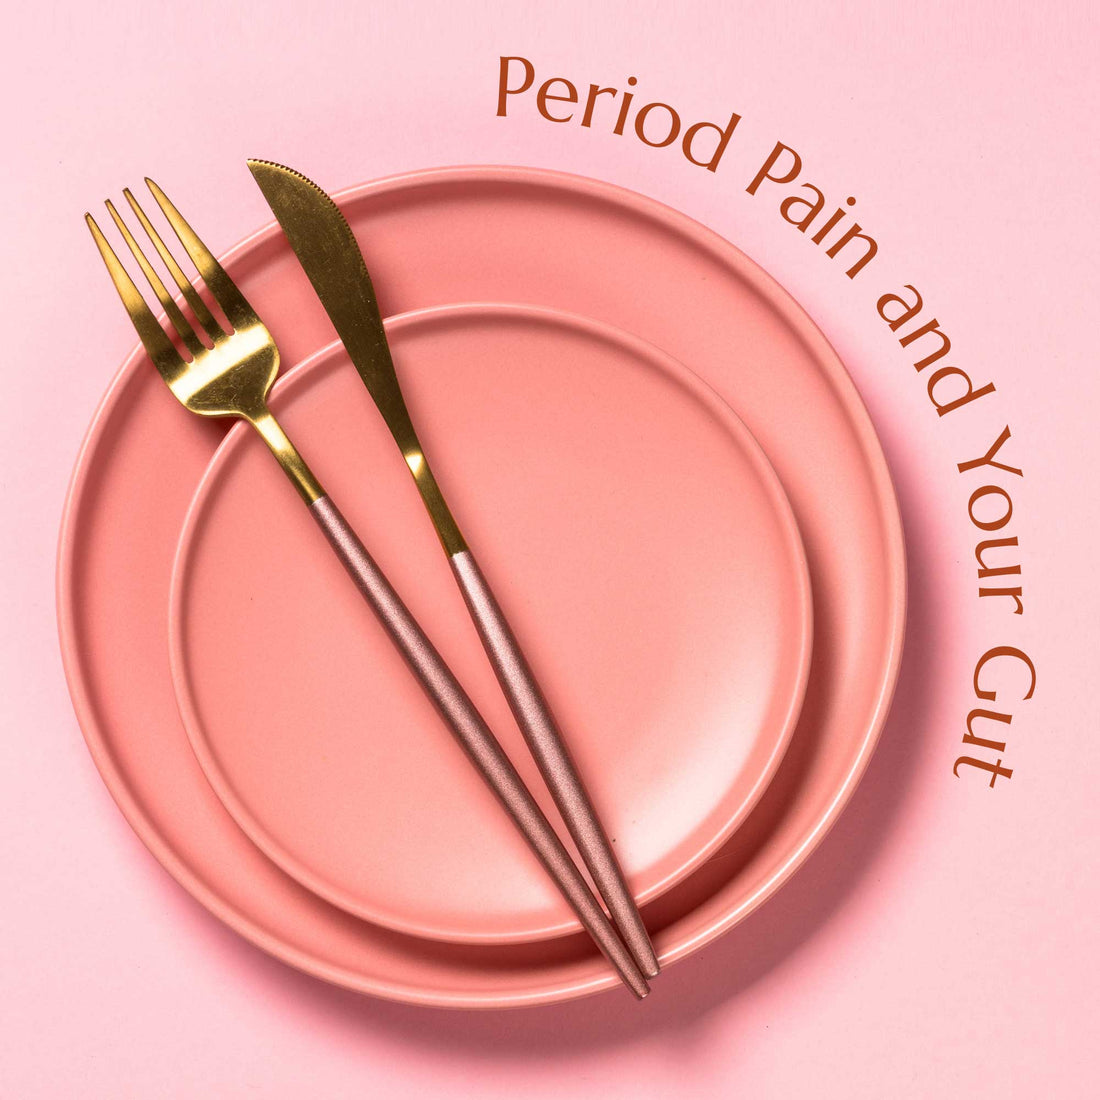 Period pain and your gut